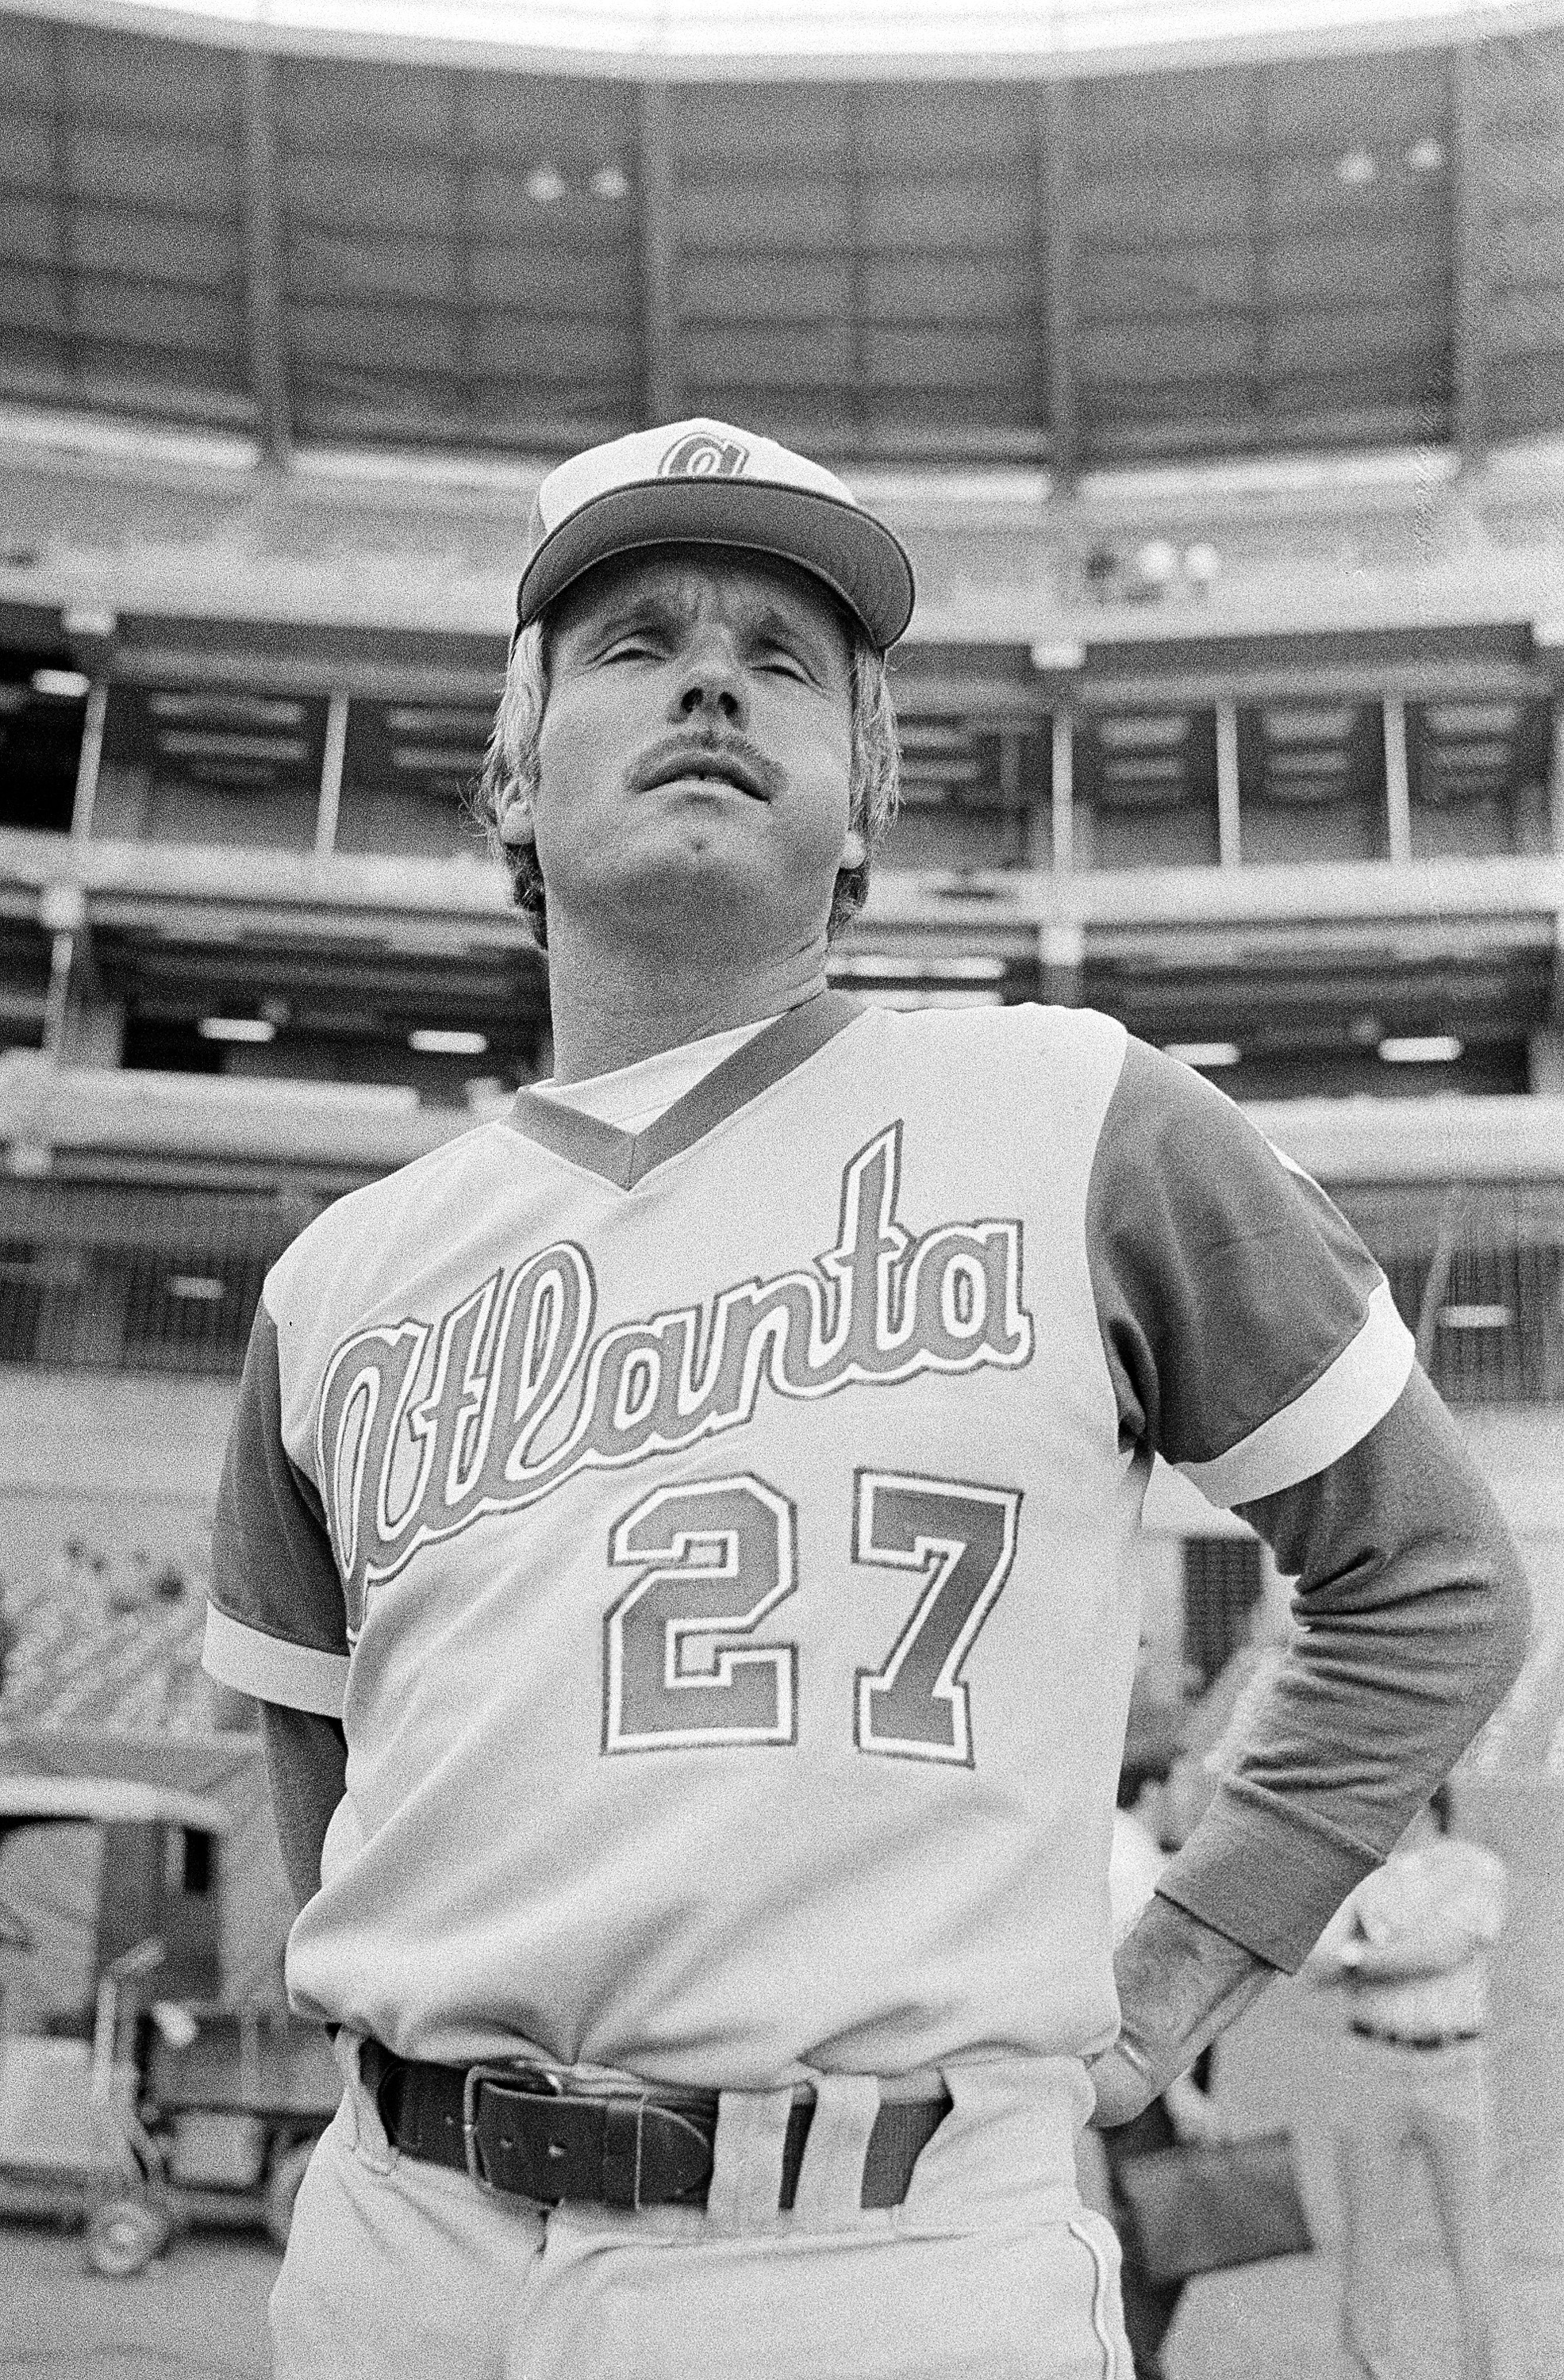 May 11, 1977 game: Owner Ted Turner makes himself Braves' manager